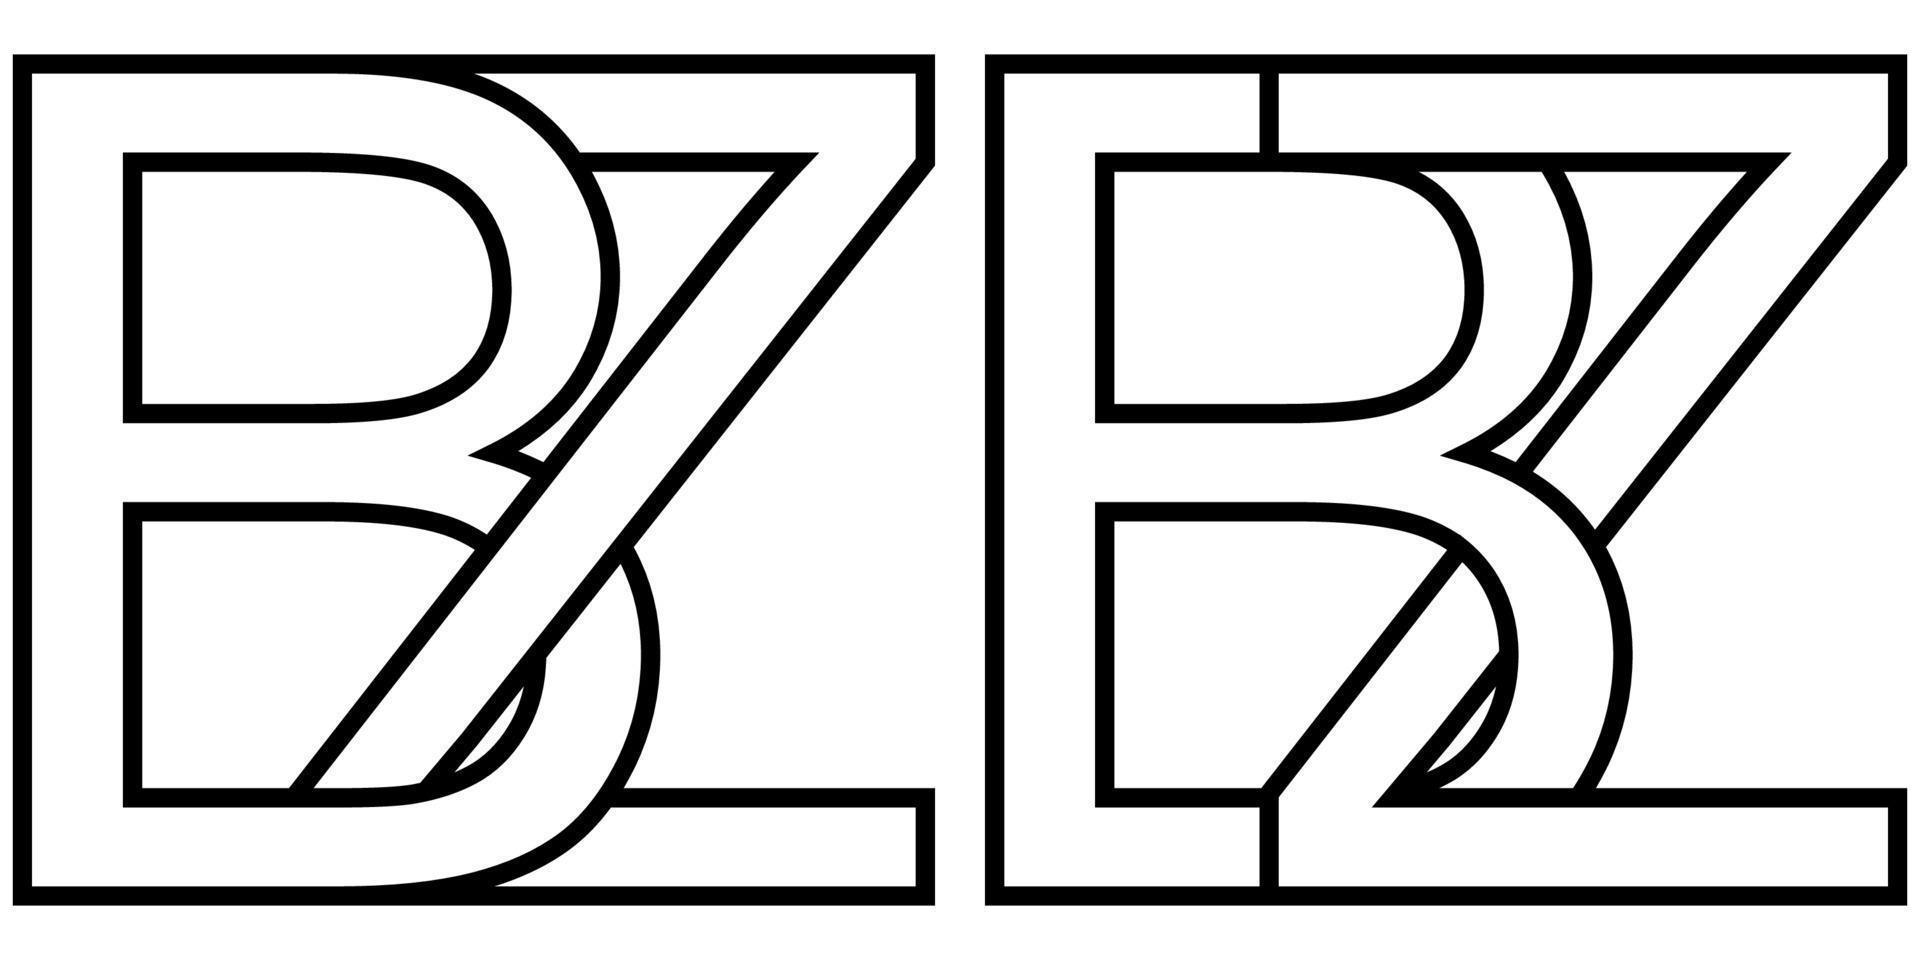 Logo sign bz zb icon sign two interlaced letters b, z vector logo bz, zb first capital letters pattern alphabet b, z